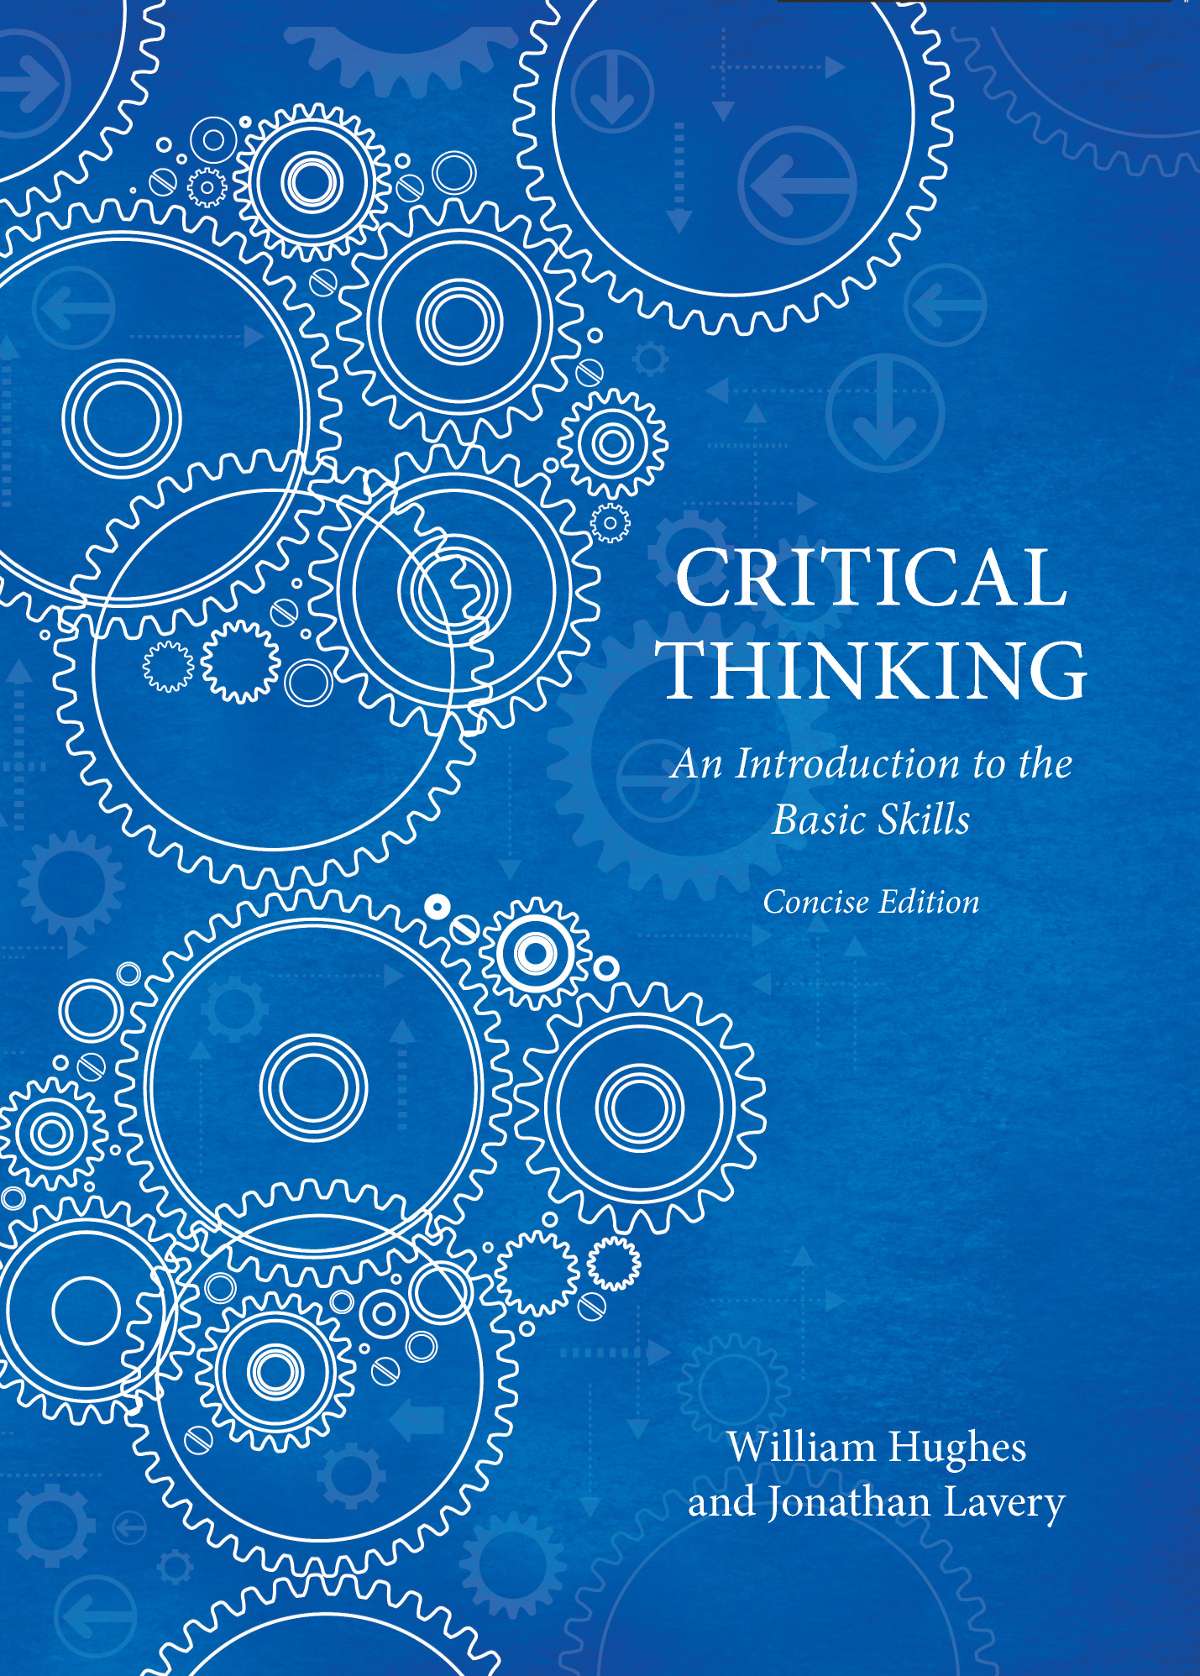 guide critical thinking